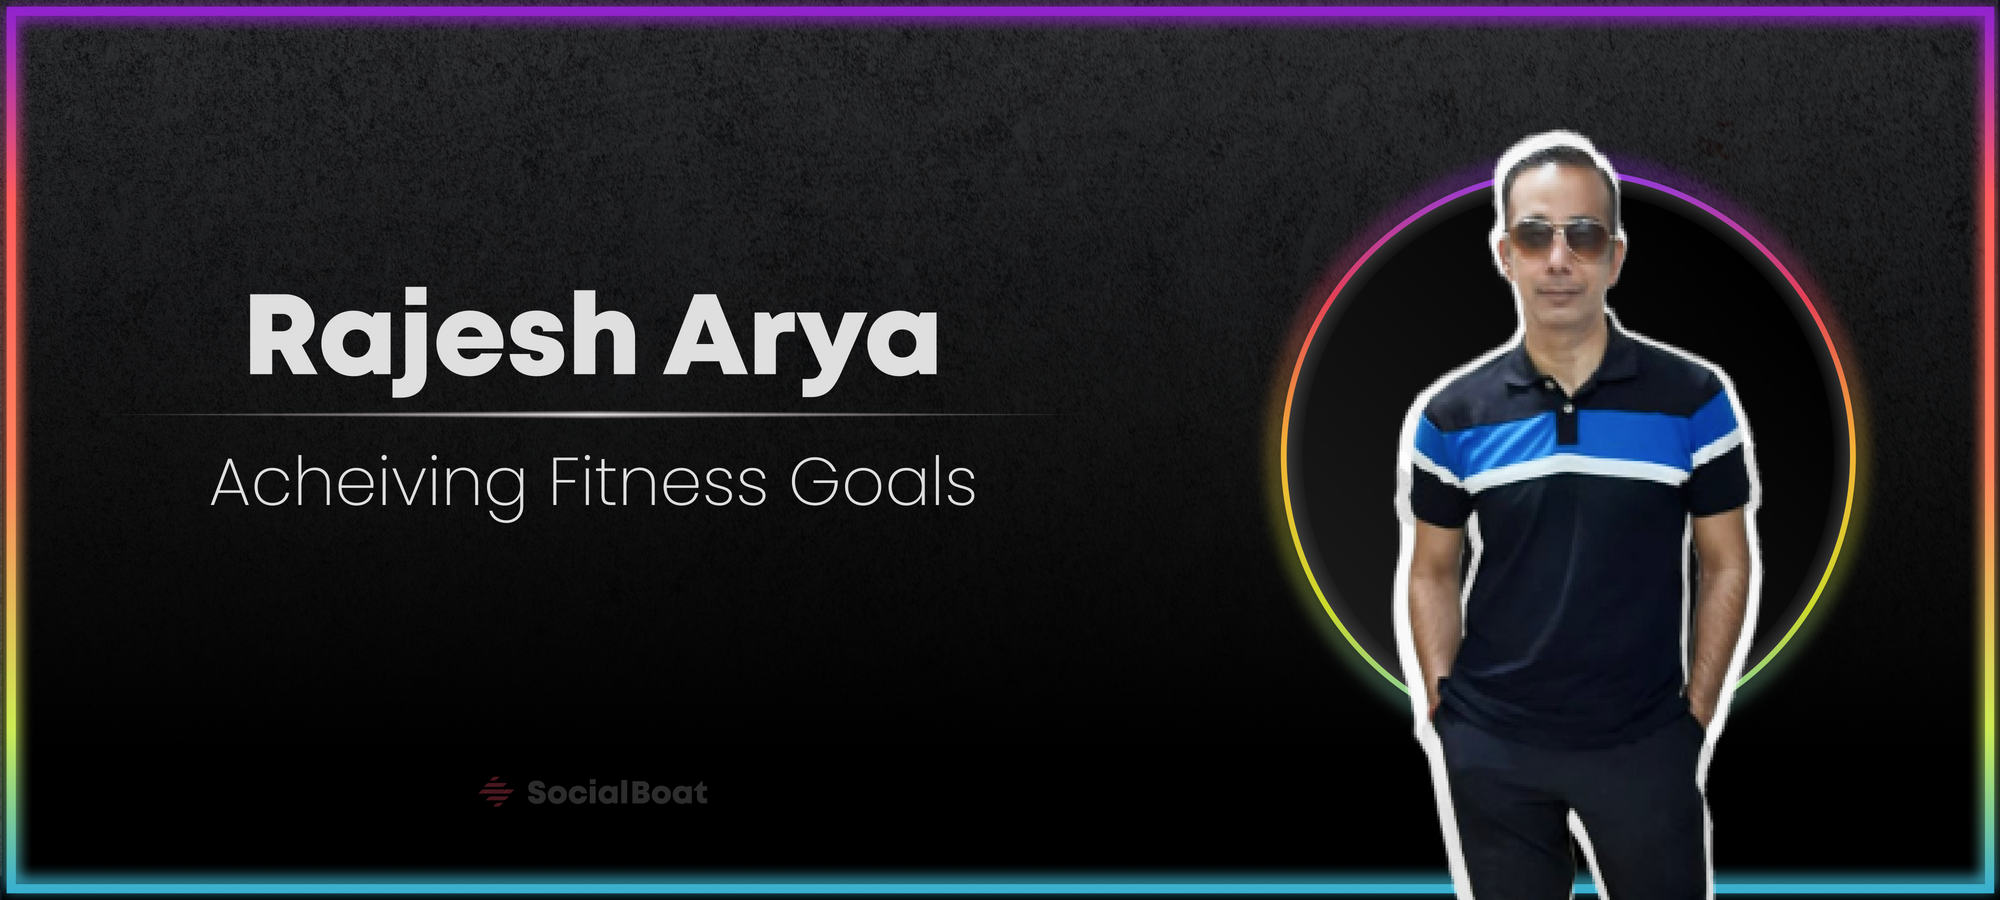 Rajesh Arya talks about being the best in all categories. 